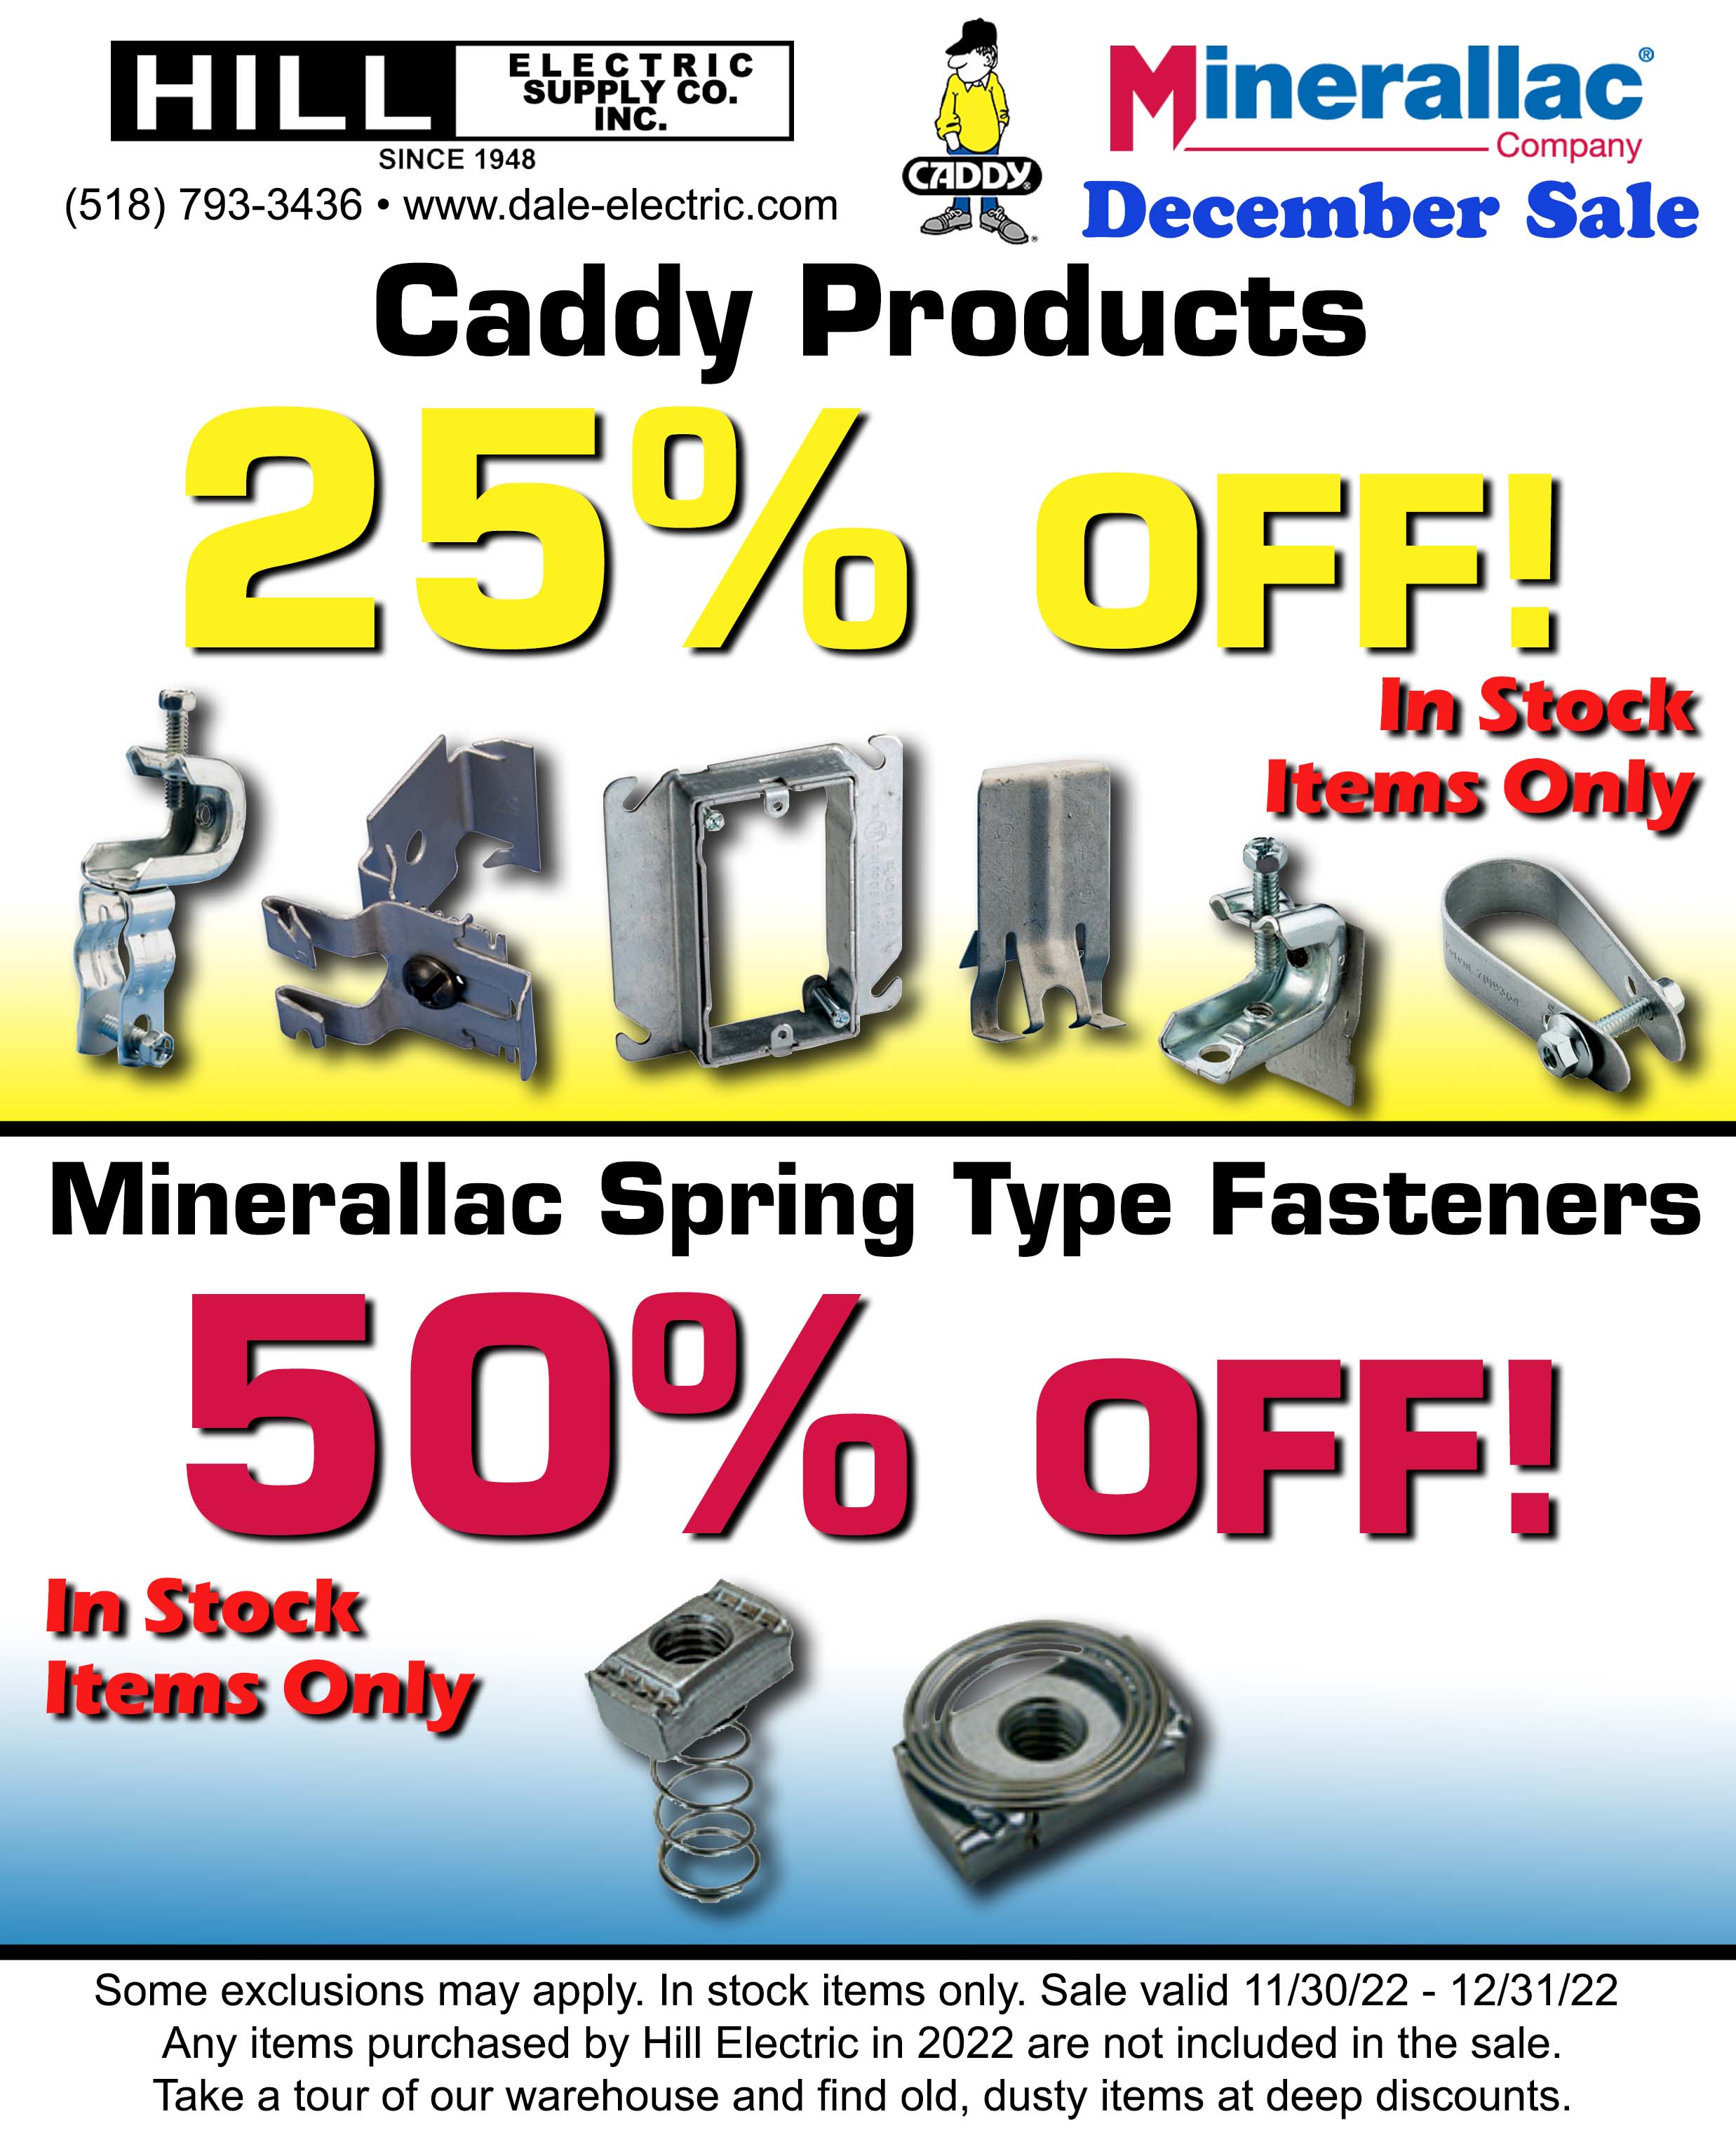 Caddy & Minerallac Sale